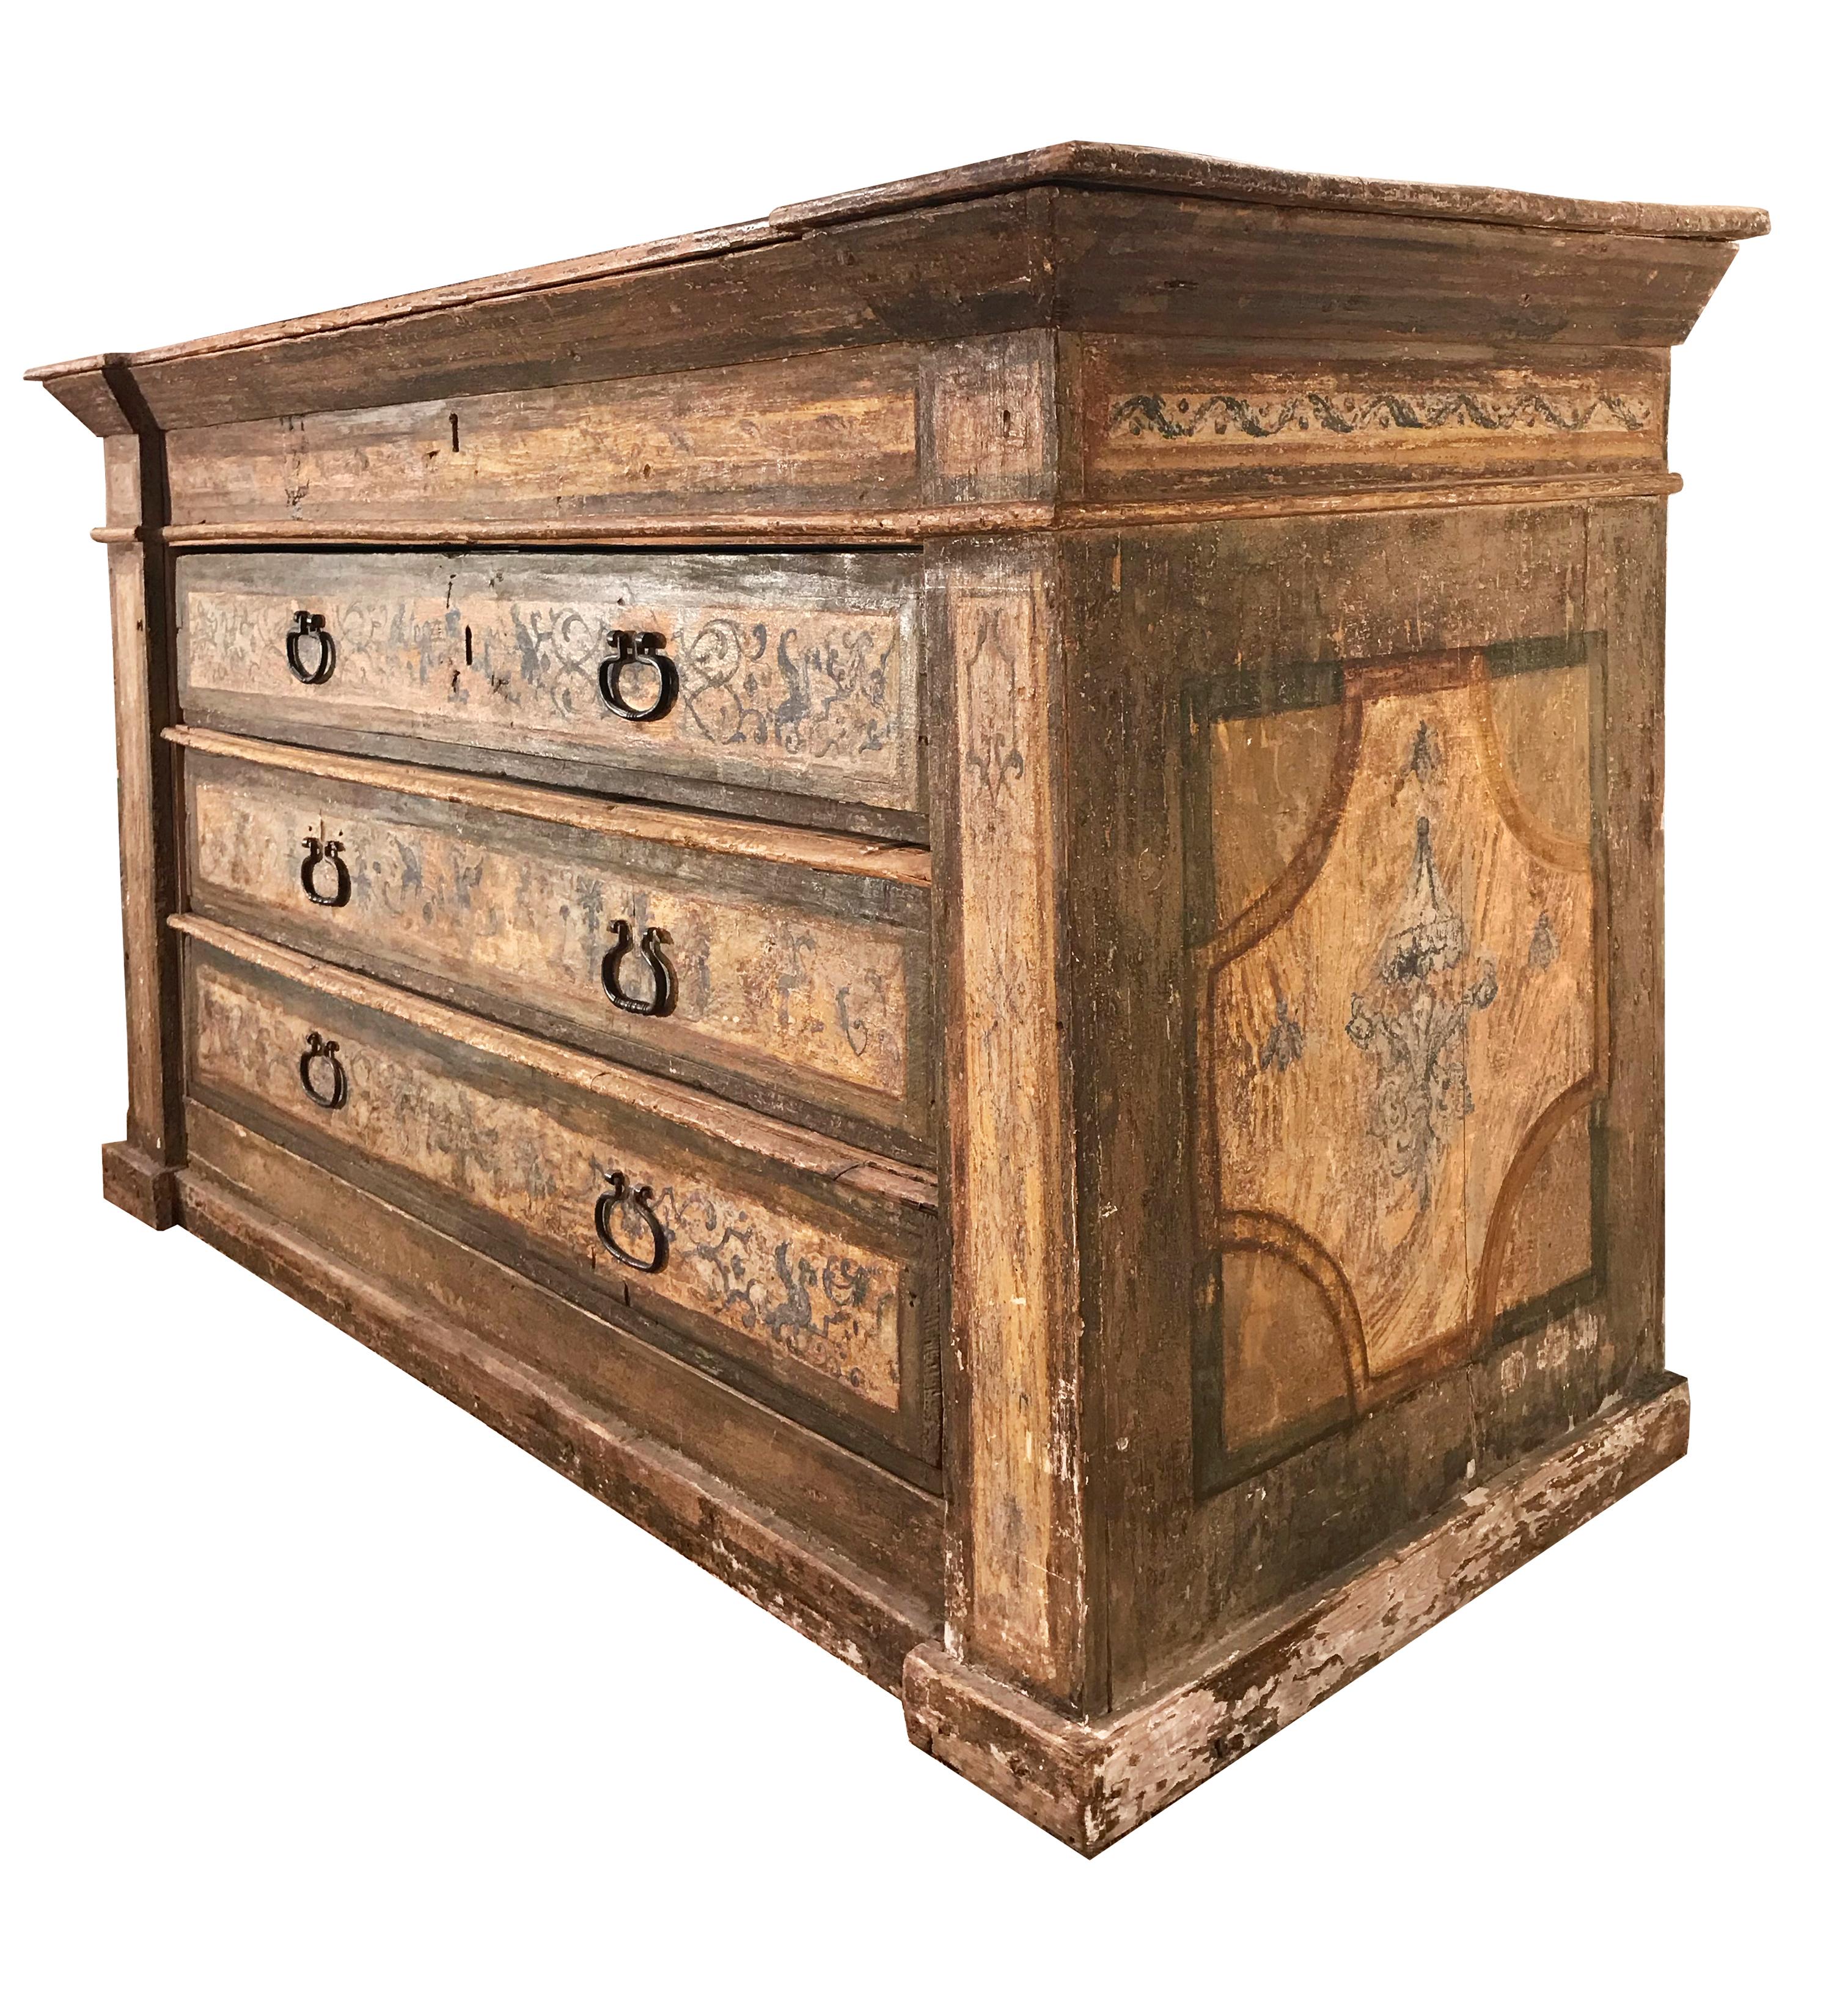 Italian Renaissance period Cassettone, or large chest of drawers, with 3-drawer and a concealed, hinged lid top, retaining its period polychrome painted arabesque decoration over pine construction with 6 iron pulls and 2 keys.
Northern Italy, 16th